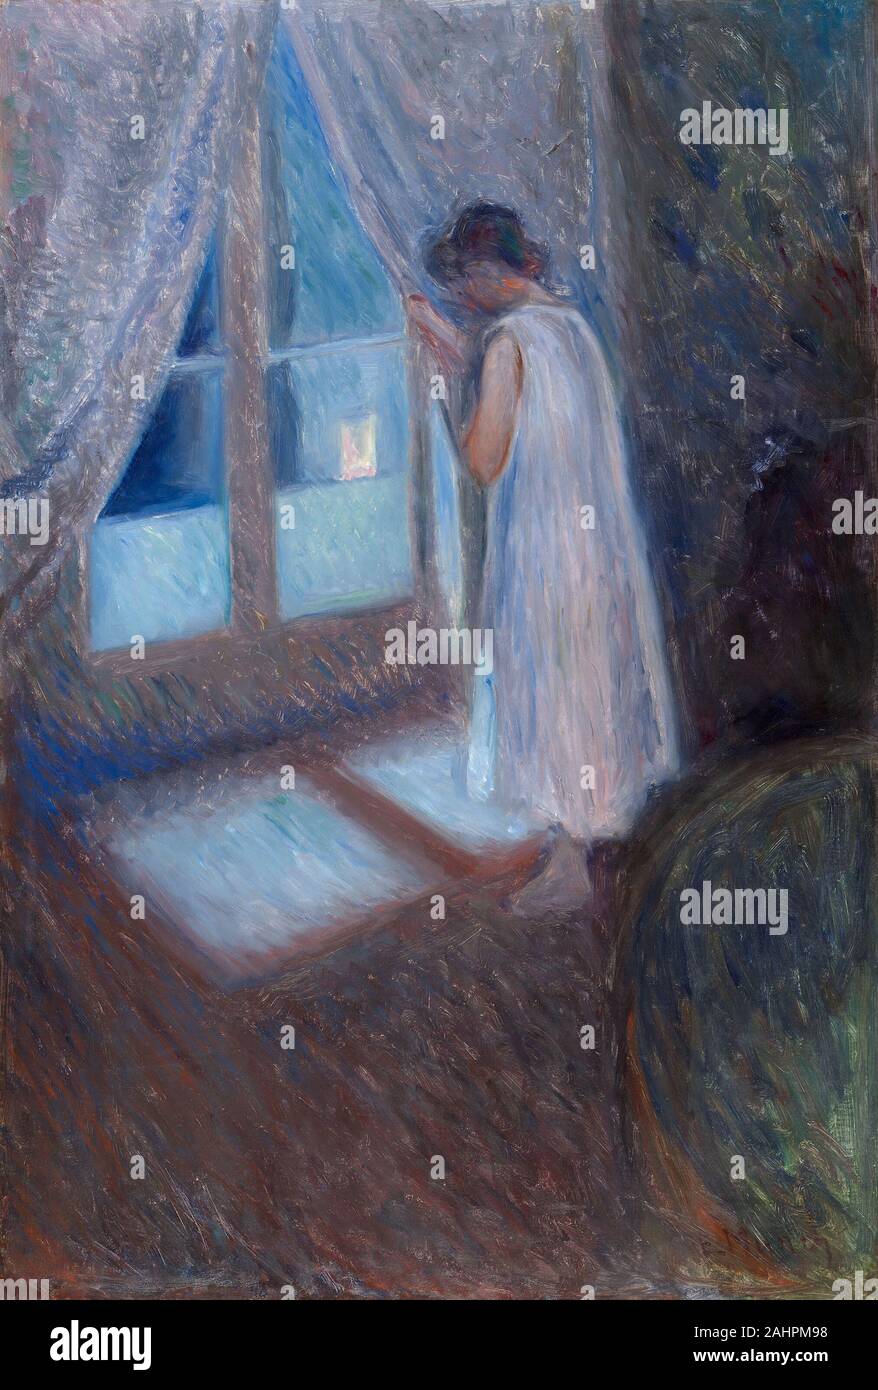 Edvard Munch. The Girl by the Window. 1893. Norway. Oil on canvas Edvard Munch’s life and art?—?particularly his iconic work The Scream (1893; National Museum, Oslo)?—?have come to epitomize modern notions of anxiety. Yet the same year he painted his radical image, Munch was experimenting with other styles and themes. Frequent visits to Paris and Berlin between 1889 and 1893 brought the Norwegian artist into direct contact with the Impressionists and Symbolists. These travels encouraged him to adopt their bold brushwork, daring compositions, and imagery. But he nonetheless continued to incorpo Stock Photo